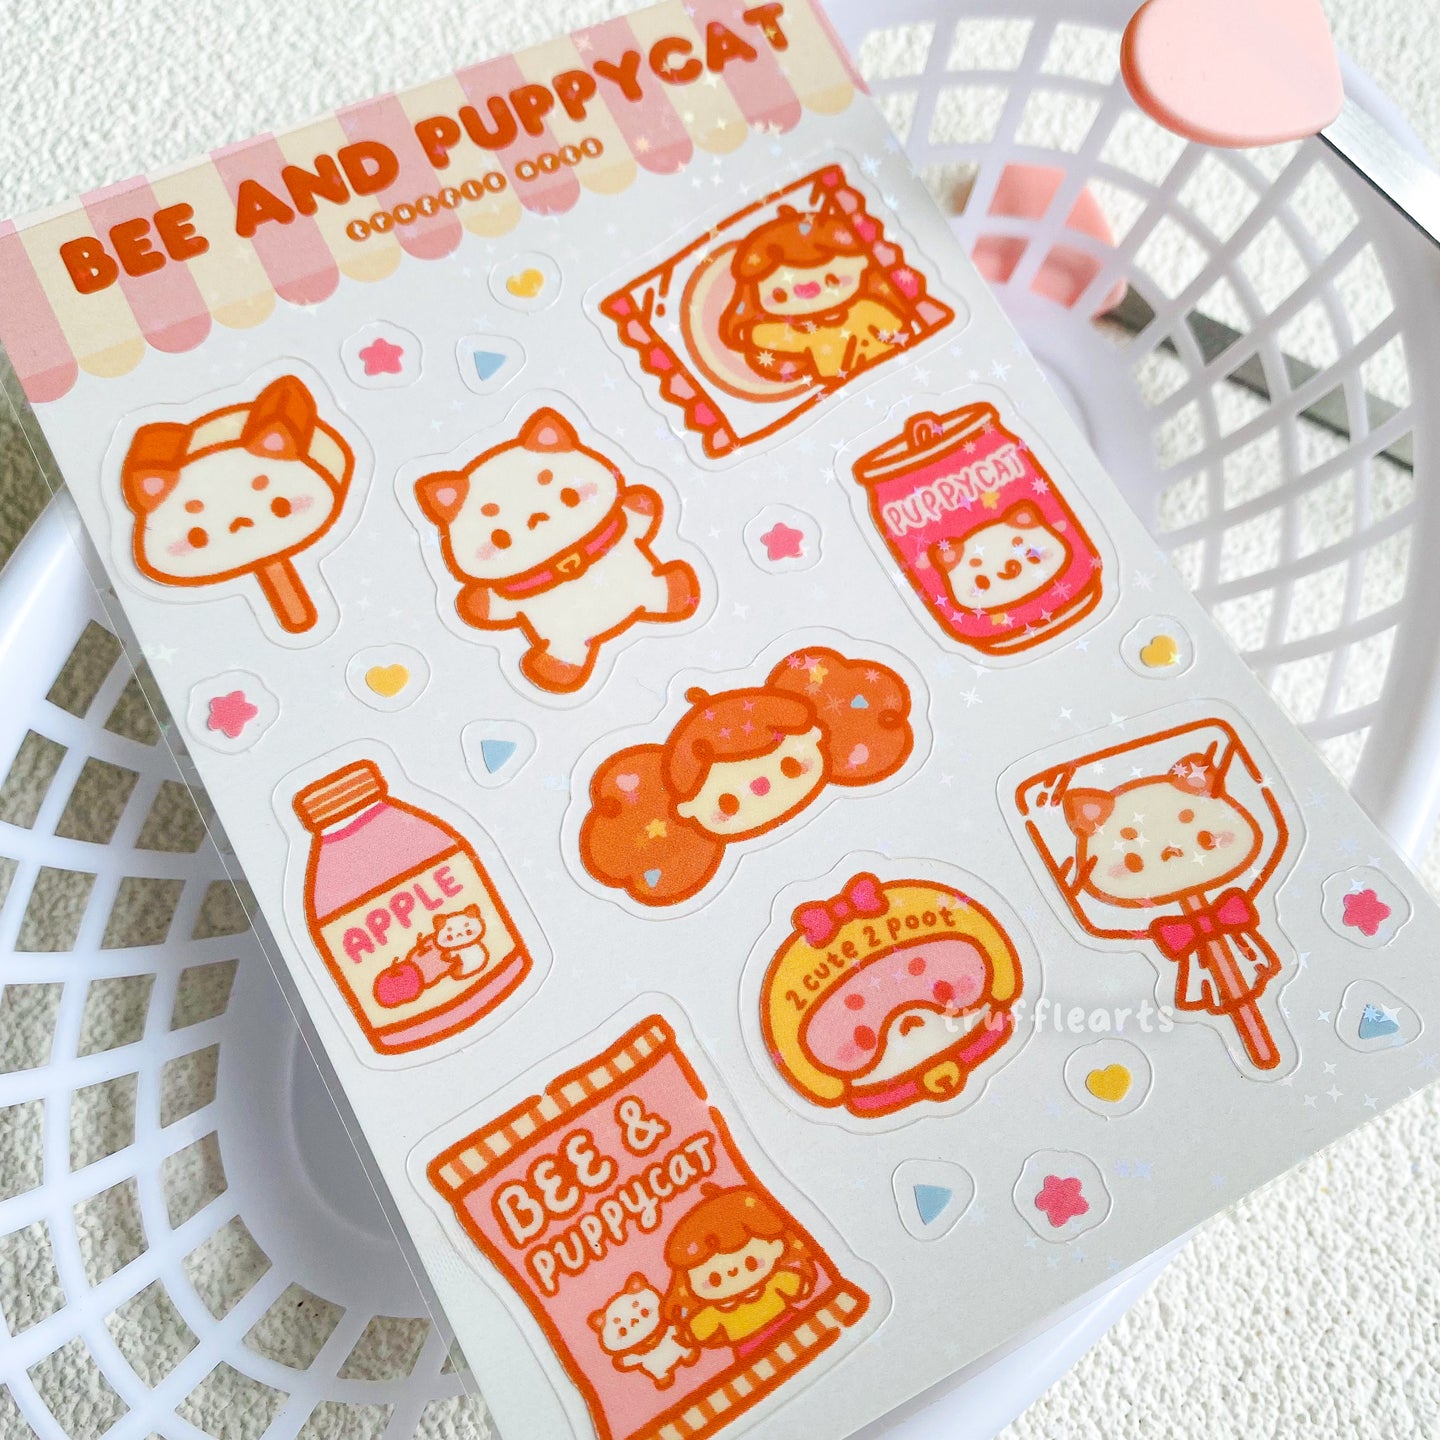 Bee and Puppycat Holographic Transparent Sticker Sheet